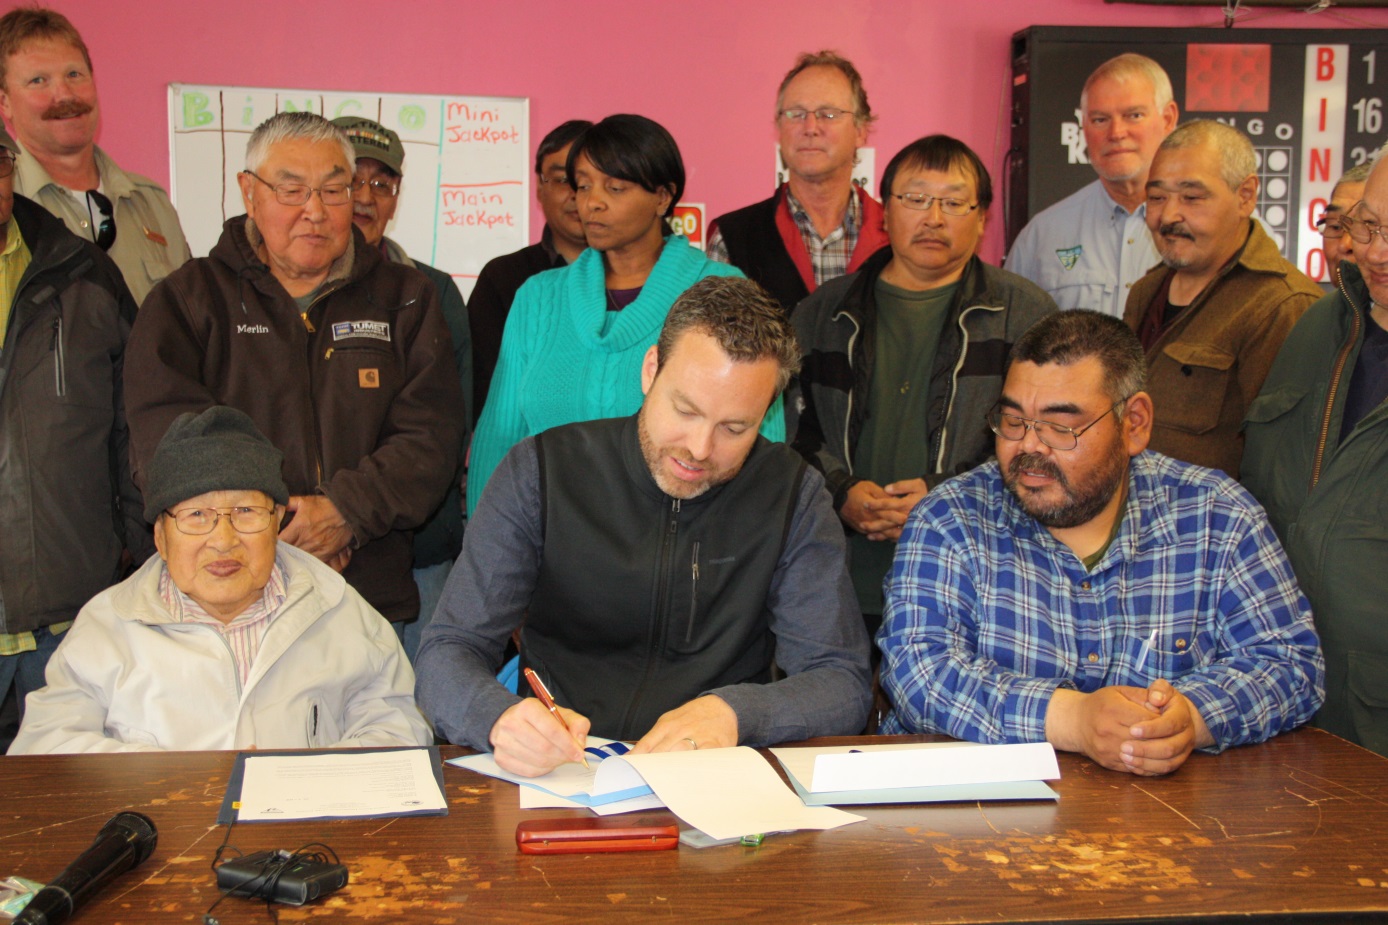 Bureau of Land Management Director Neil Kornze signs a patent transferring 1 million acres of land to Kukulget Inc. of Savoonga and the Sivuqaq Inc. of Gambell during a ceremony on St. Lawrence Island, Alaska, July 27, 2016.